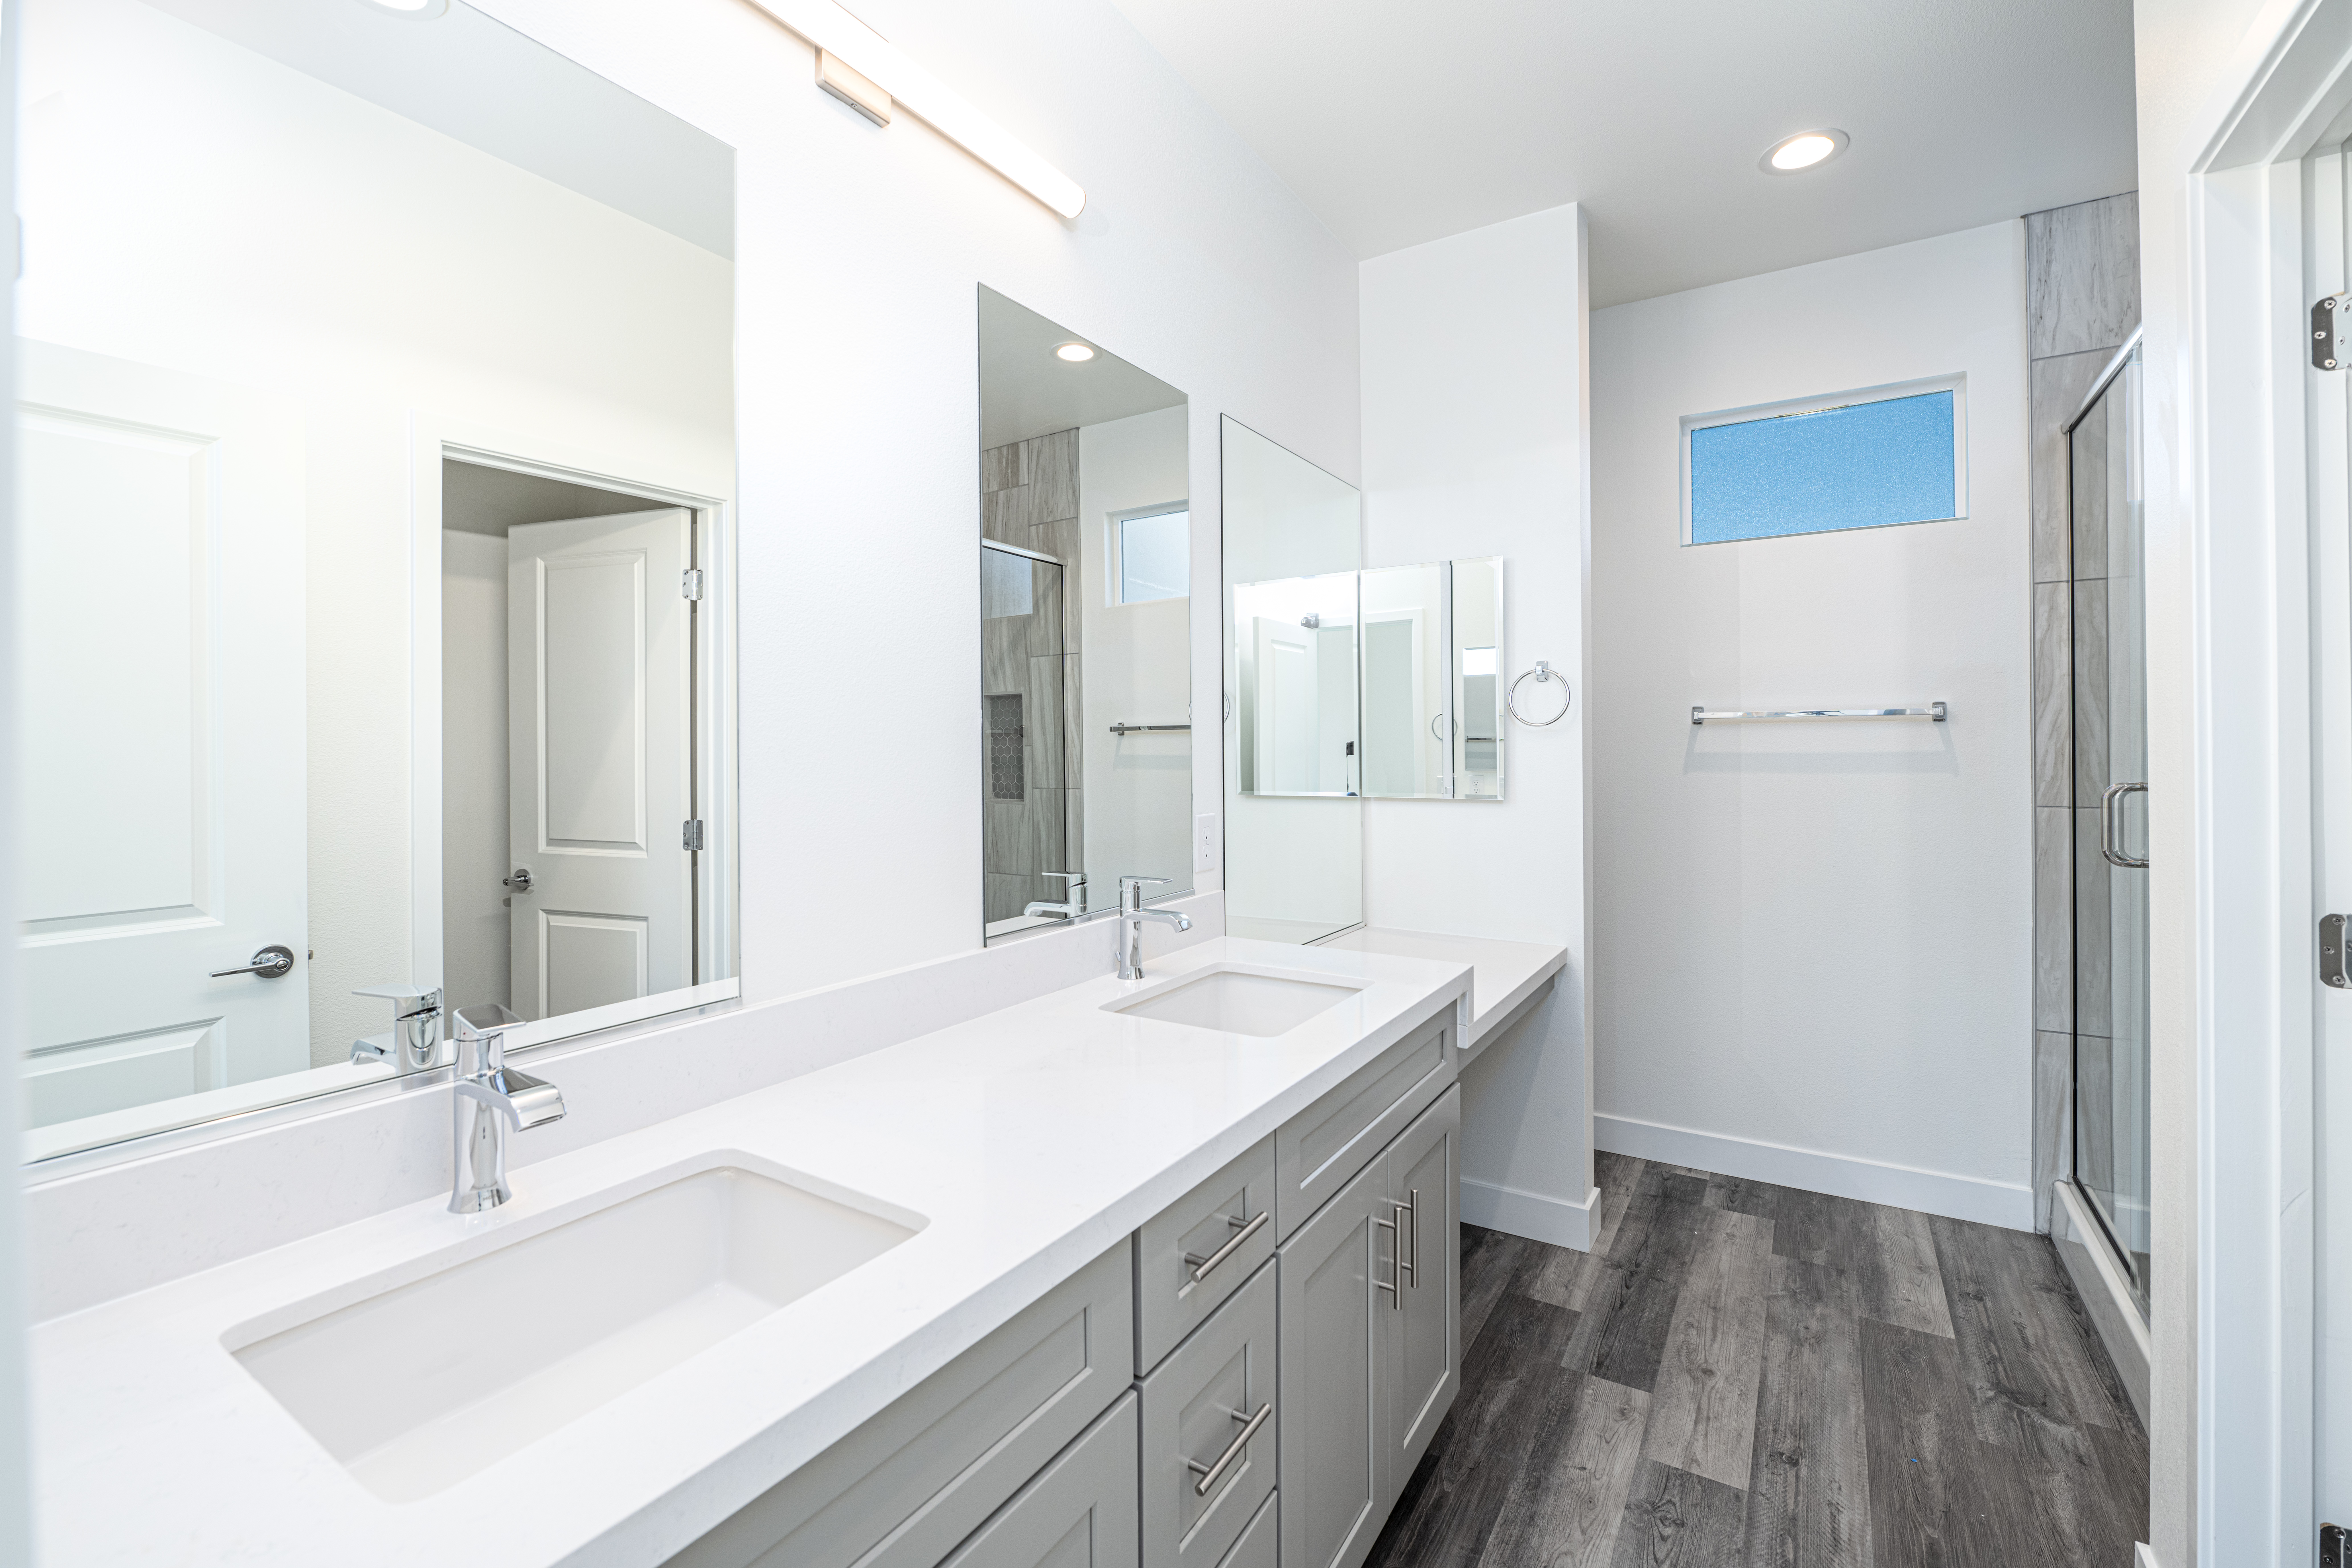 Primary Bathroom of Unit C at Thrive by Edward Homes